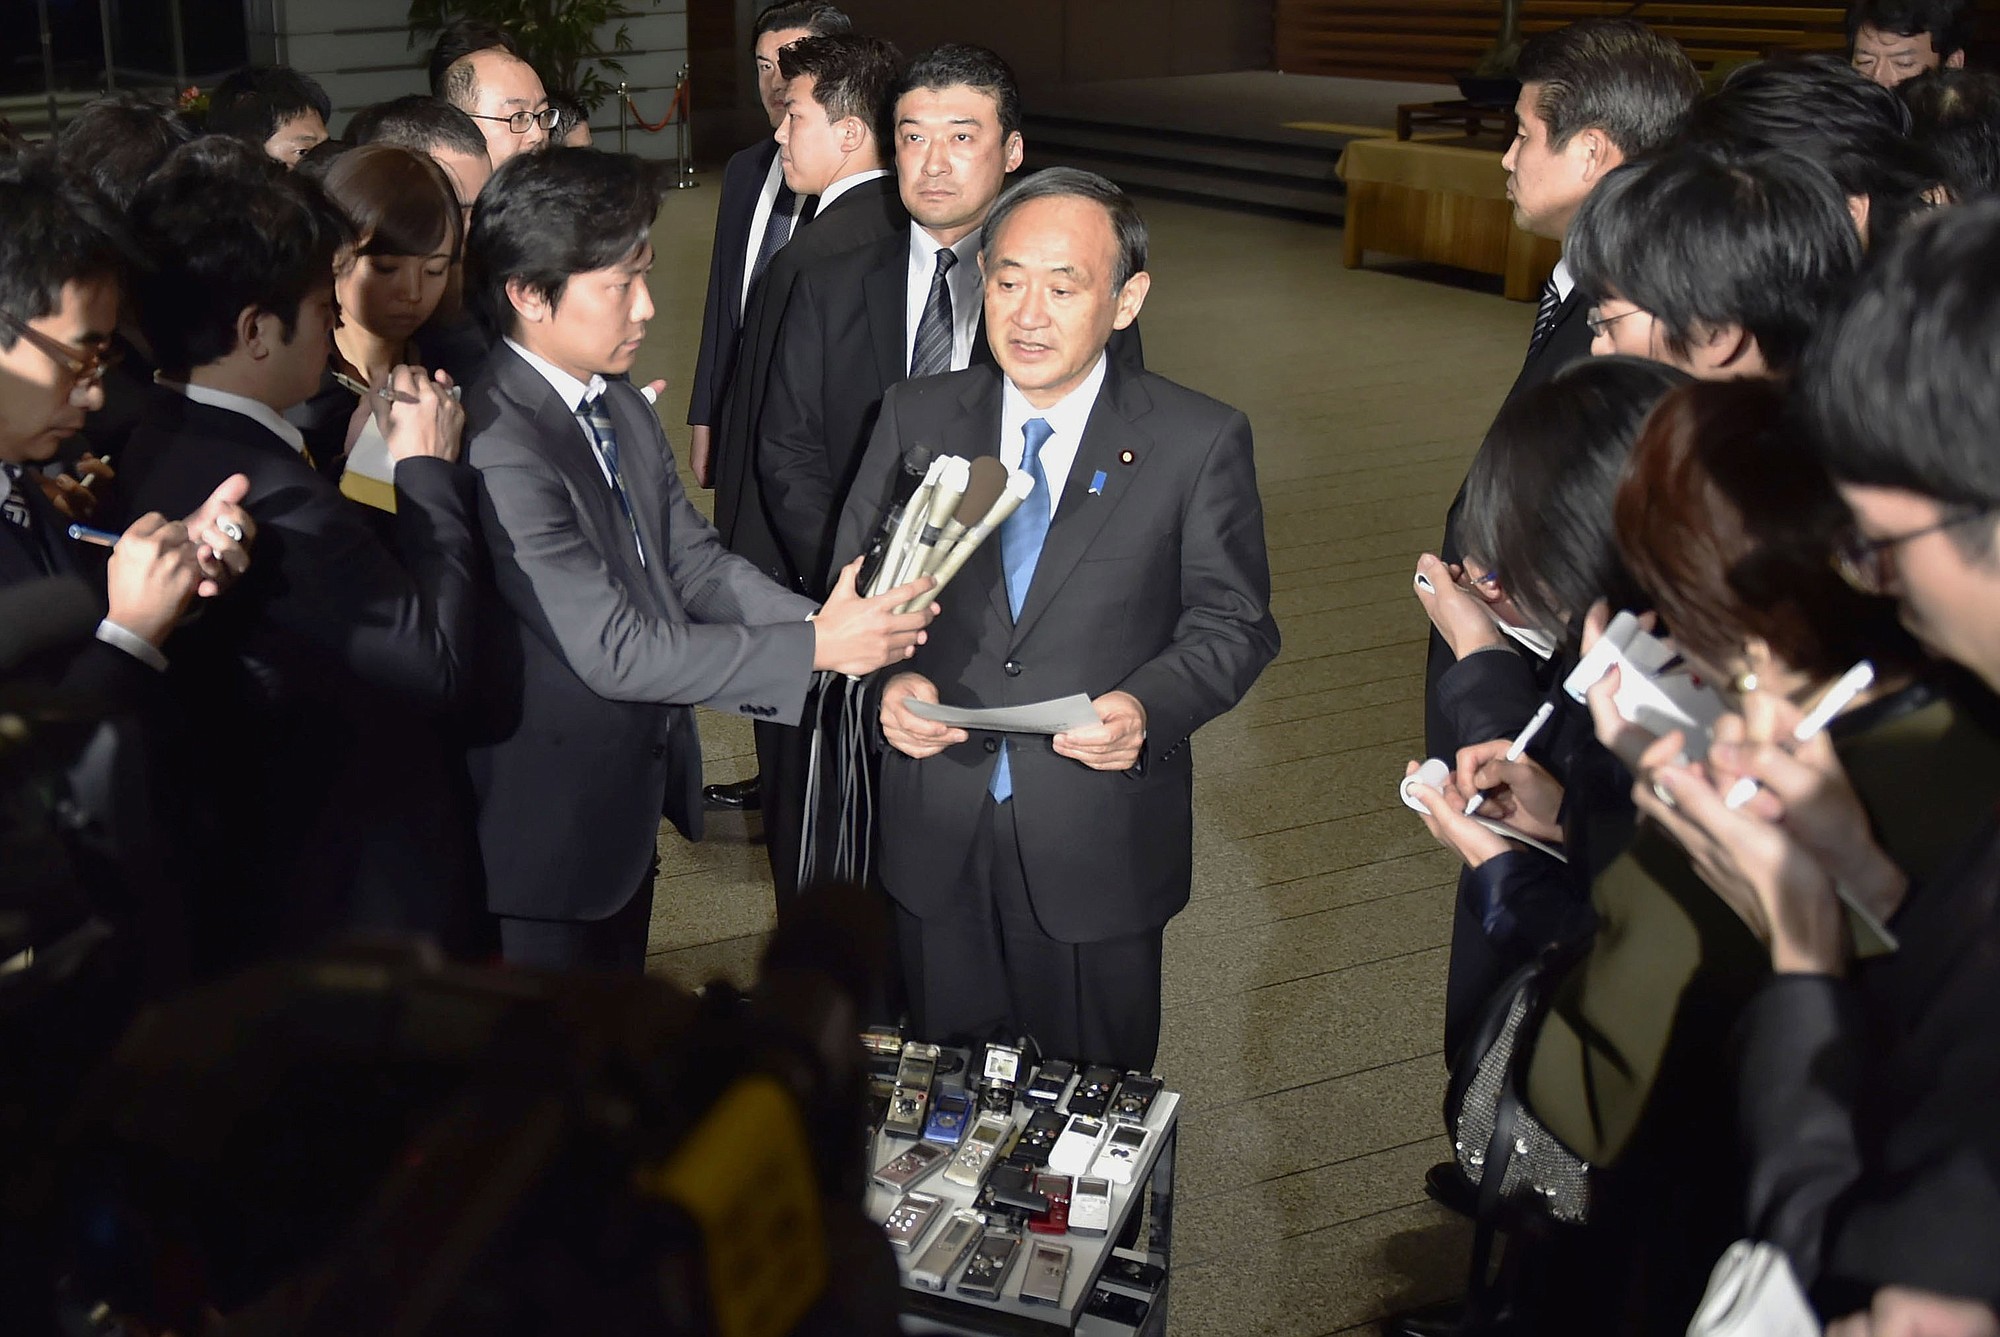 Japan's government spokesman Chief Cabinet Secretary Yoshihide Suga speaks to the media at the prime minister's office in Tokyo on Wednesday shortly after the latest online message purportedly from the Islamic State group warmed that Japanese hostage Kenji Goto and a Jordanian pilot the extremists hold have less than &quot;24 hours left to live.&quot;